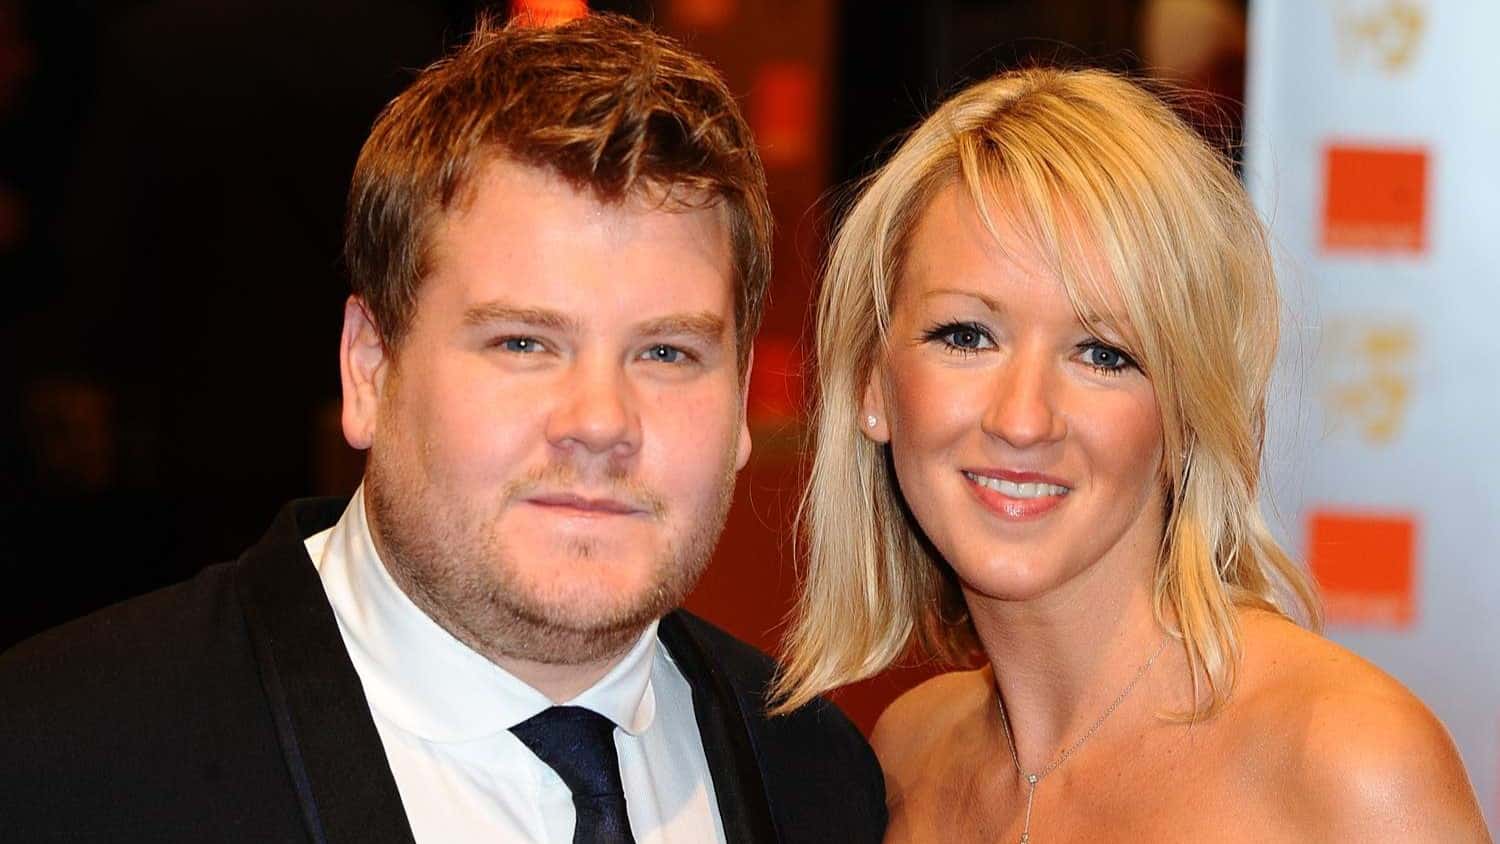 On September 15, 2012, Corden and Julia Carey tied the knot